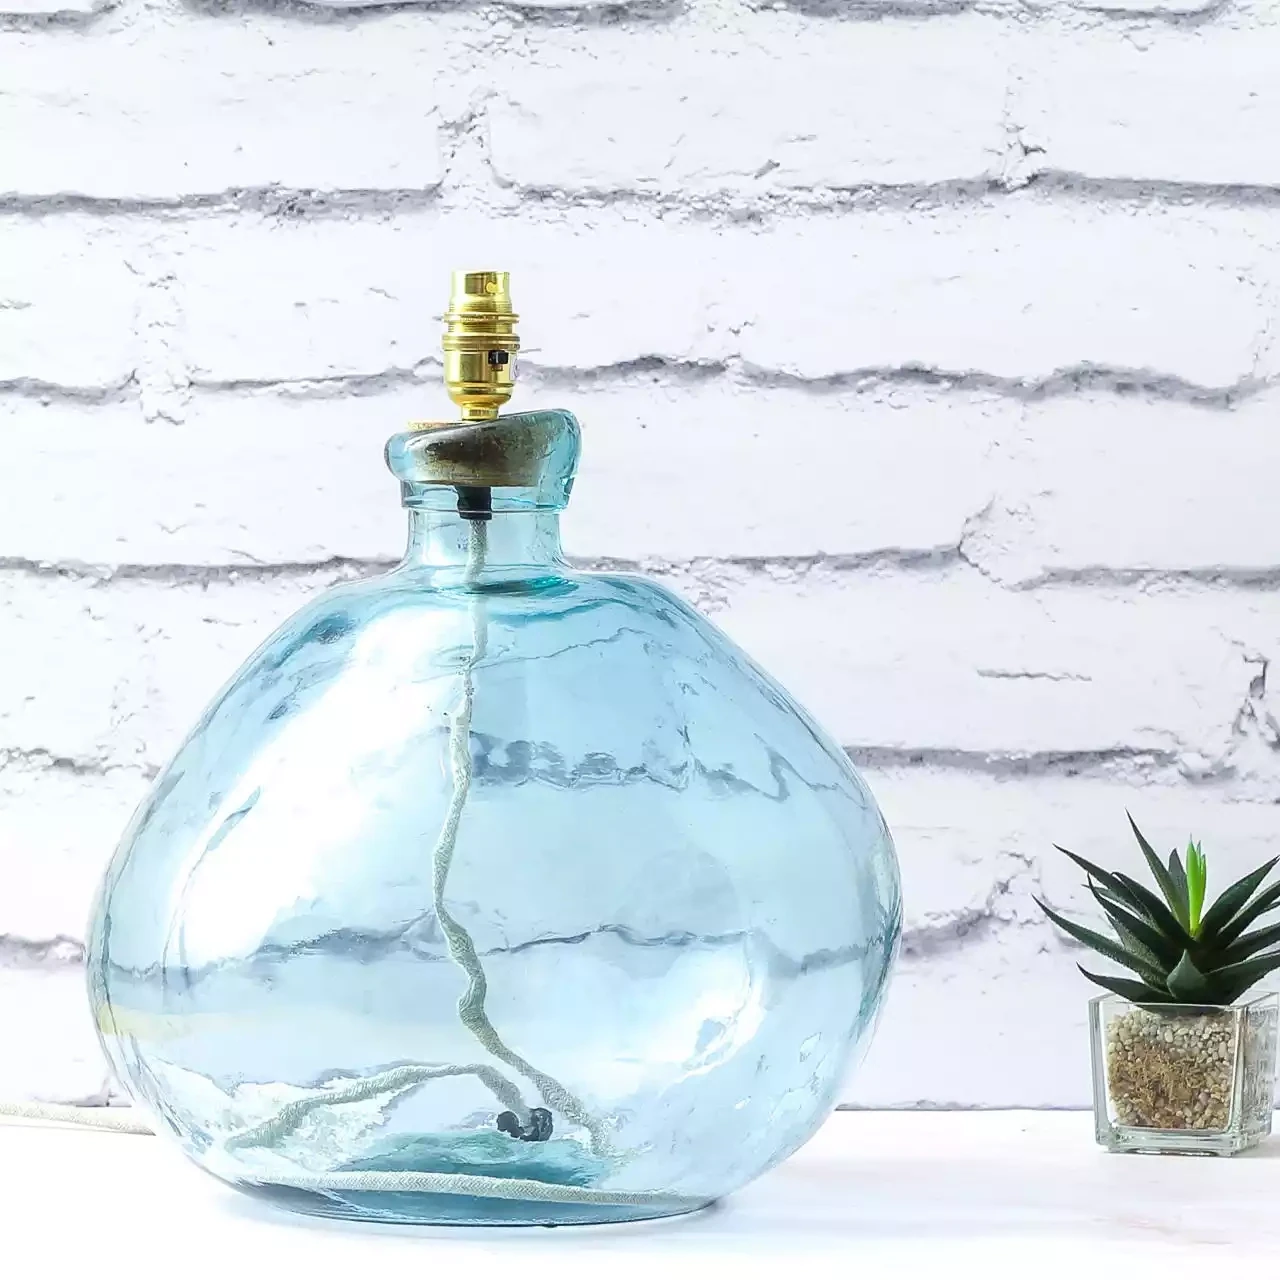 Simplicity Recycled Glass Rustic Lamp Base - 39cm - Light Blue by Jarapa